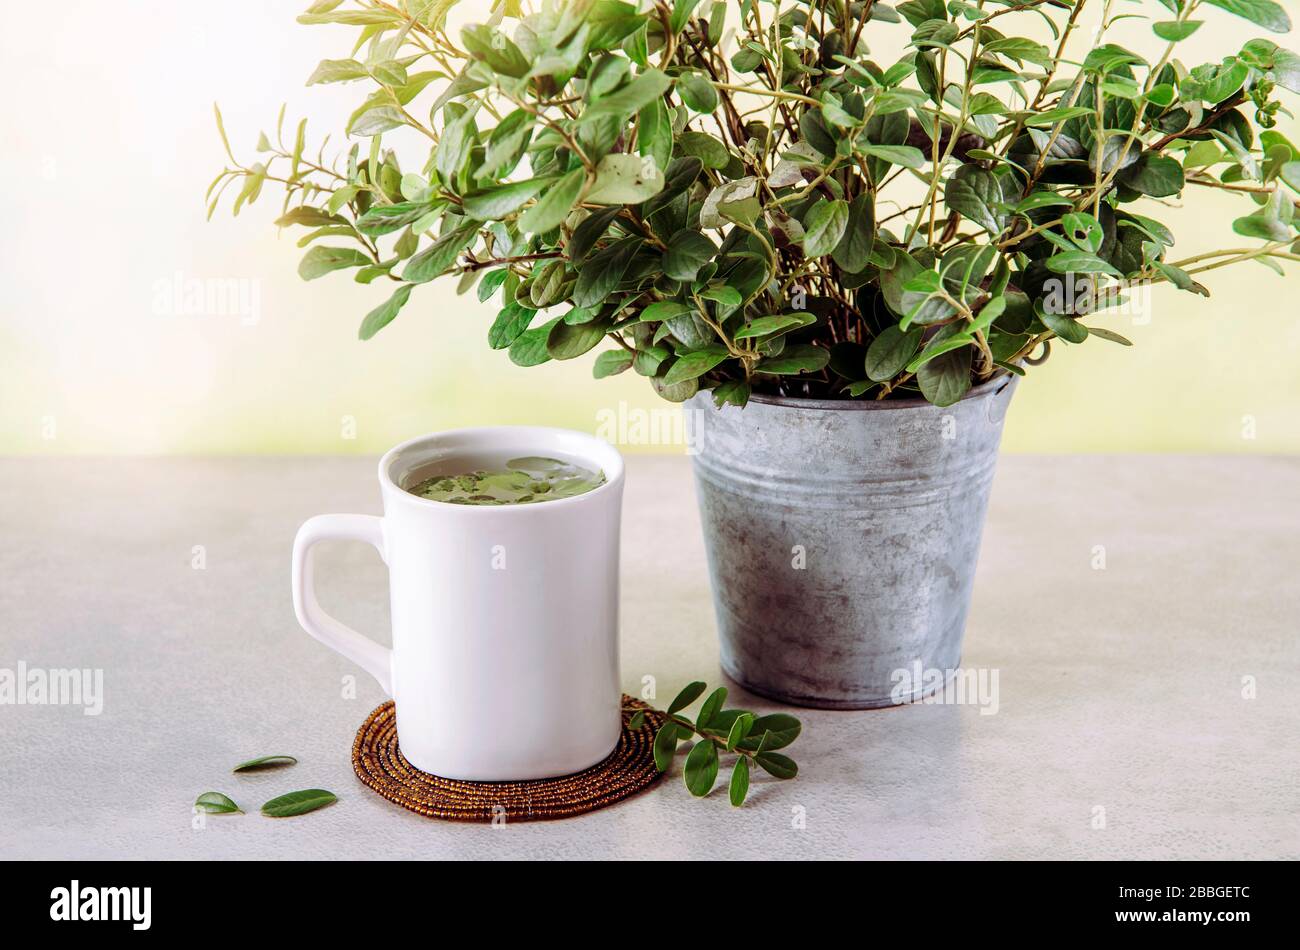 Lingonberry (Vaccinium vitis-idaea) leaves used to make herbal medicine tea drink. Zinc bucket with fresh branches on background for decoration. Stock Photo